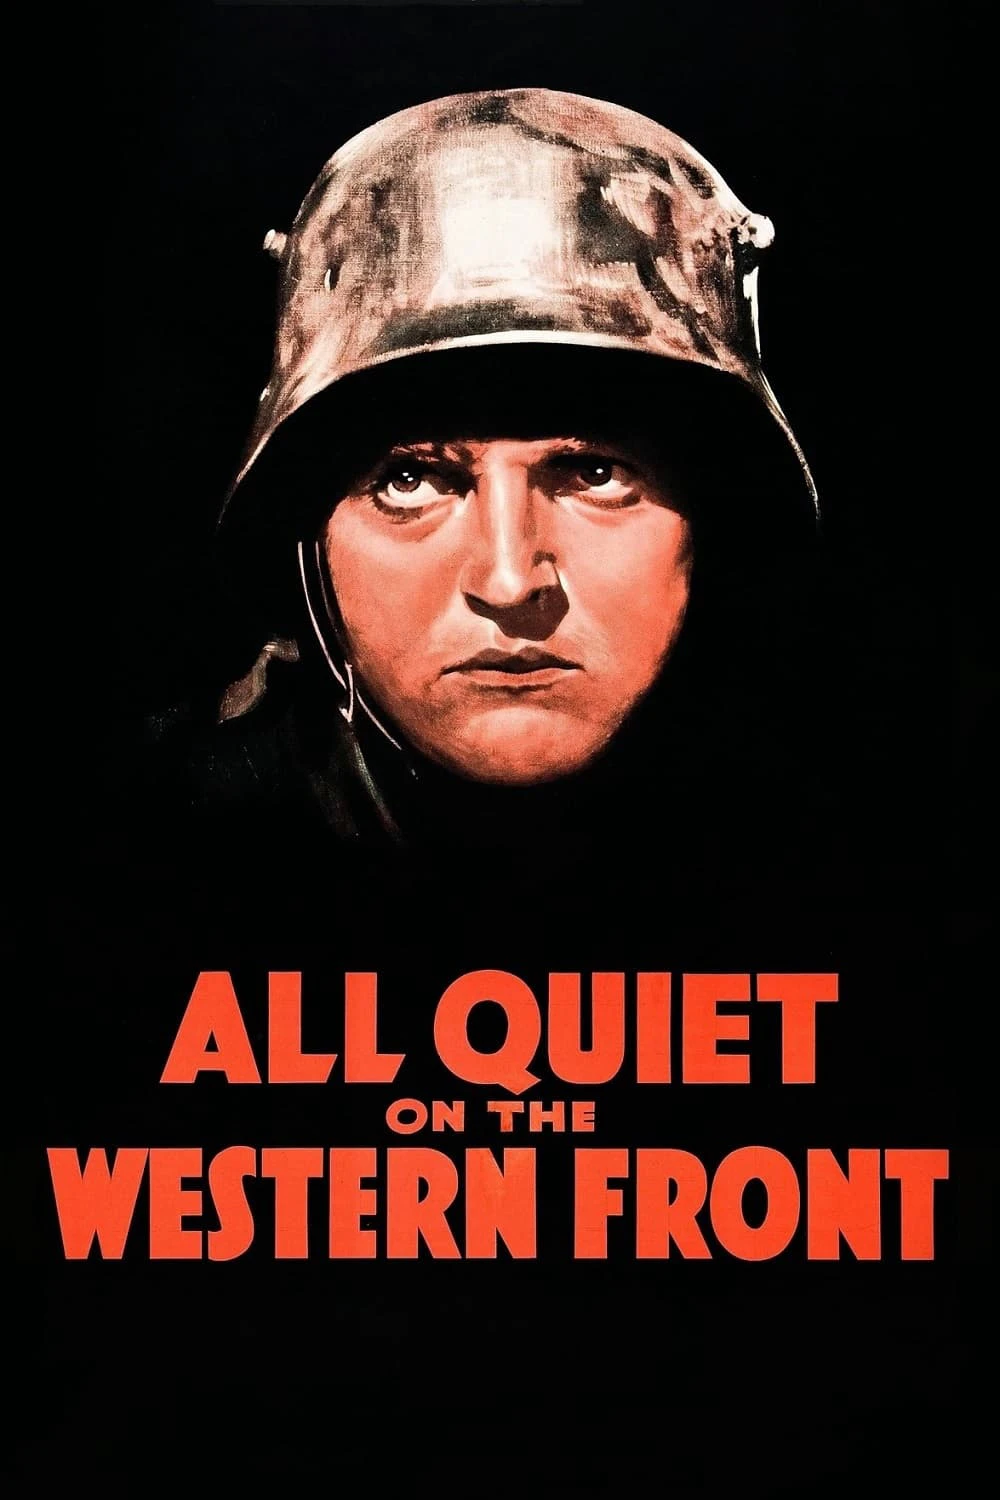 All Quiet on the Western Front | All Quiet on the Western Front (1930)